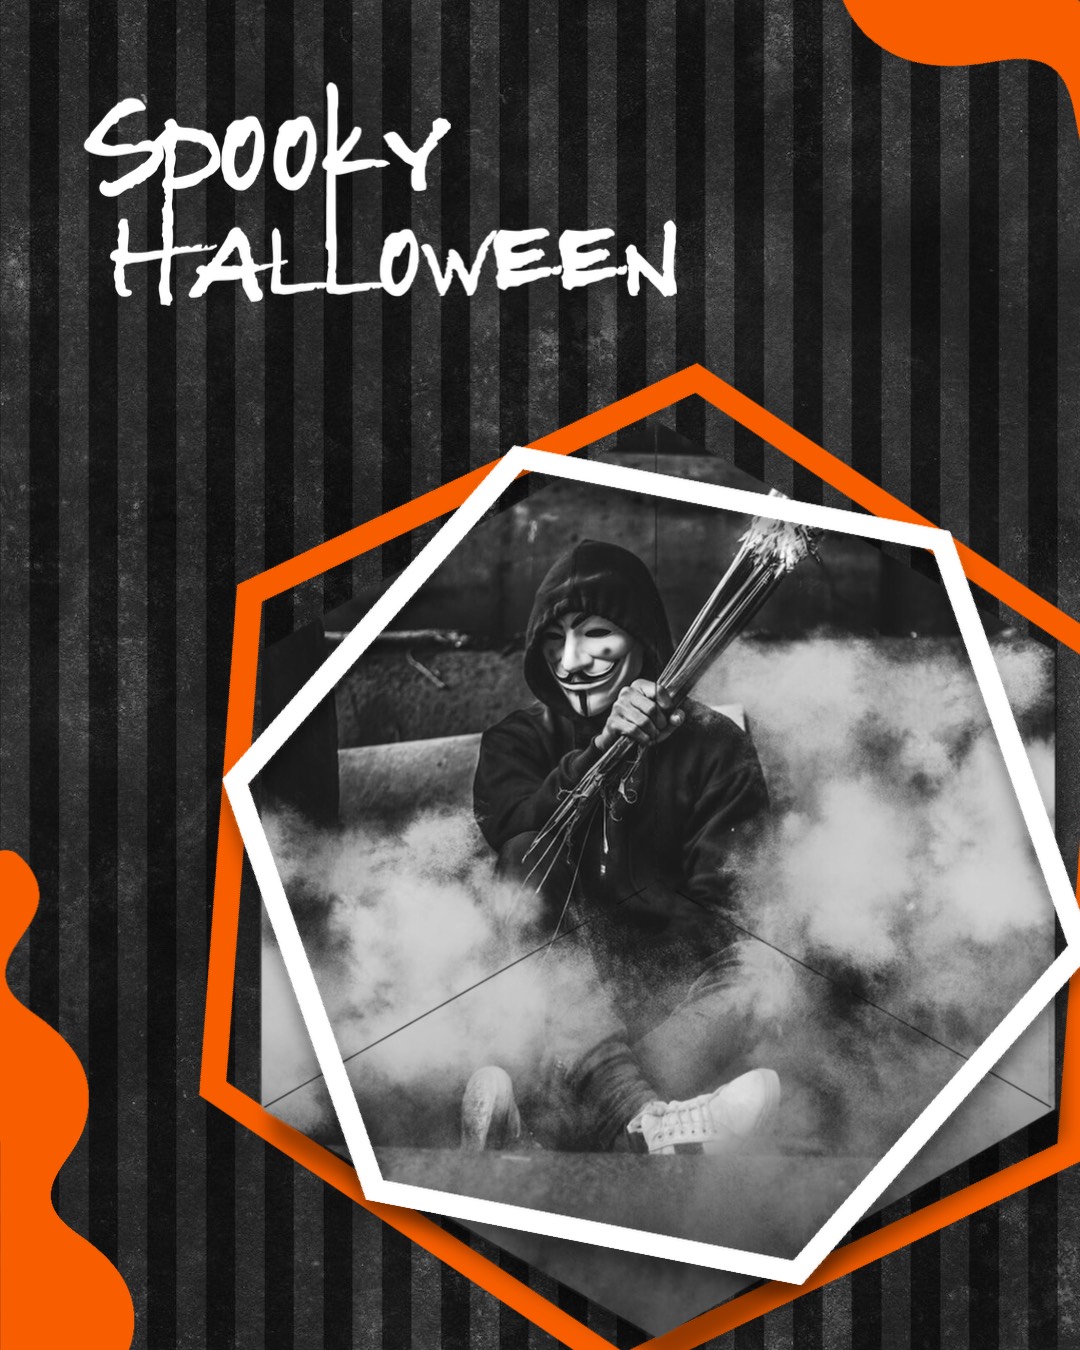 A Black And White Photo Of A Person Holding A Broom Halloween Template